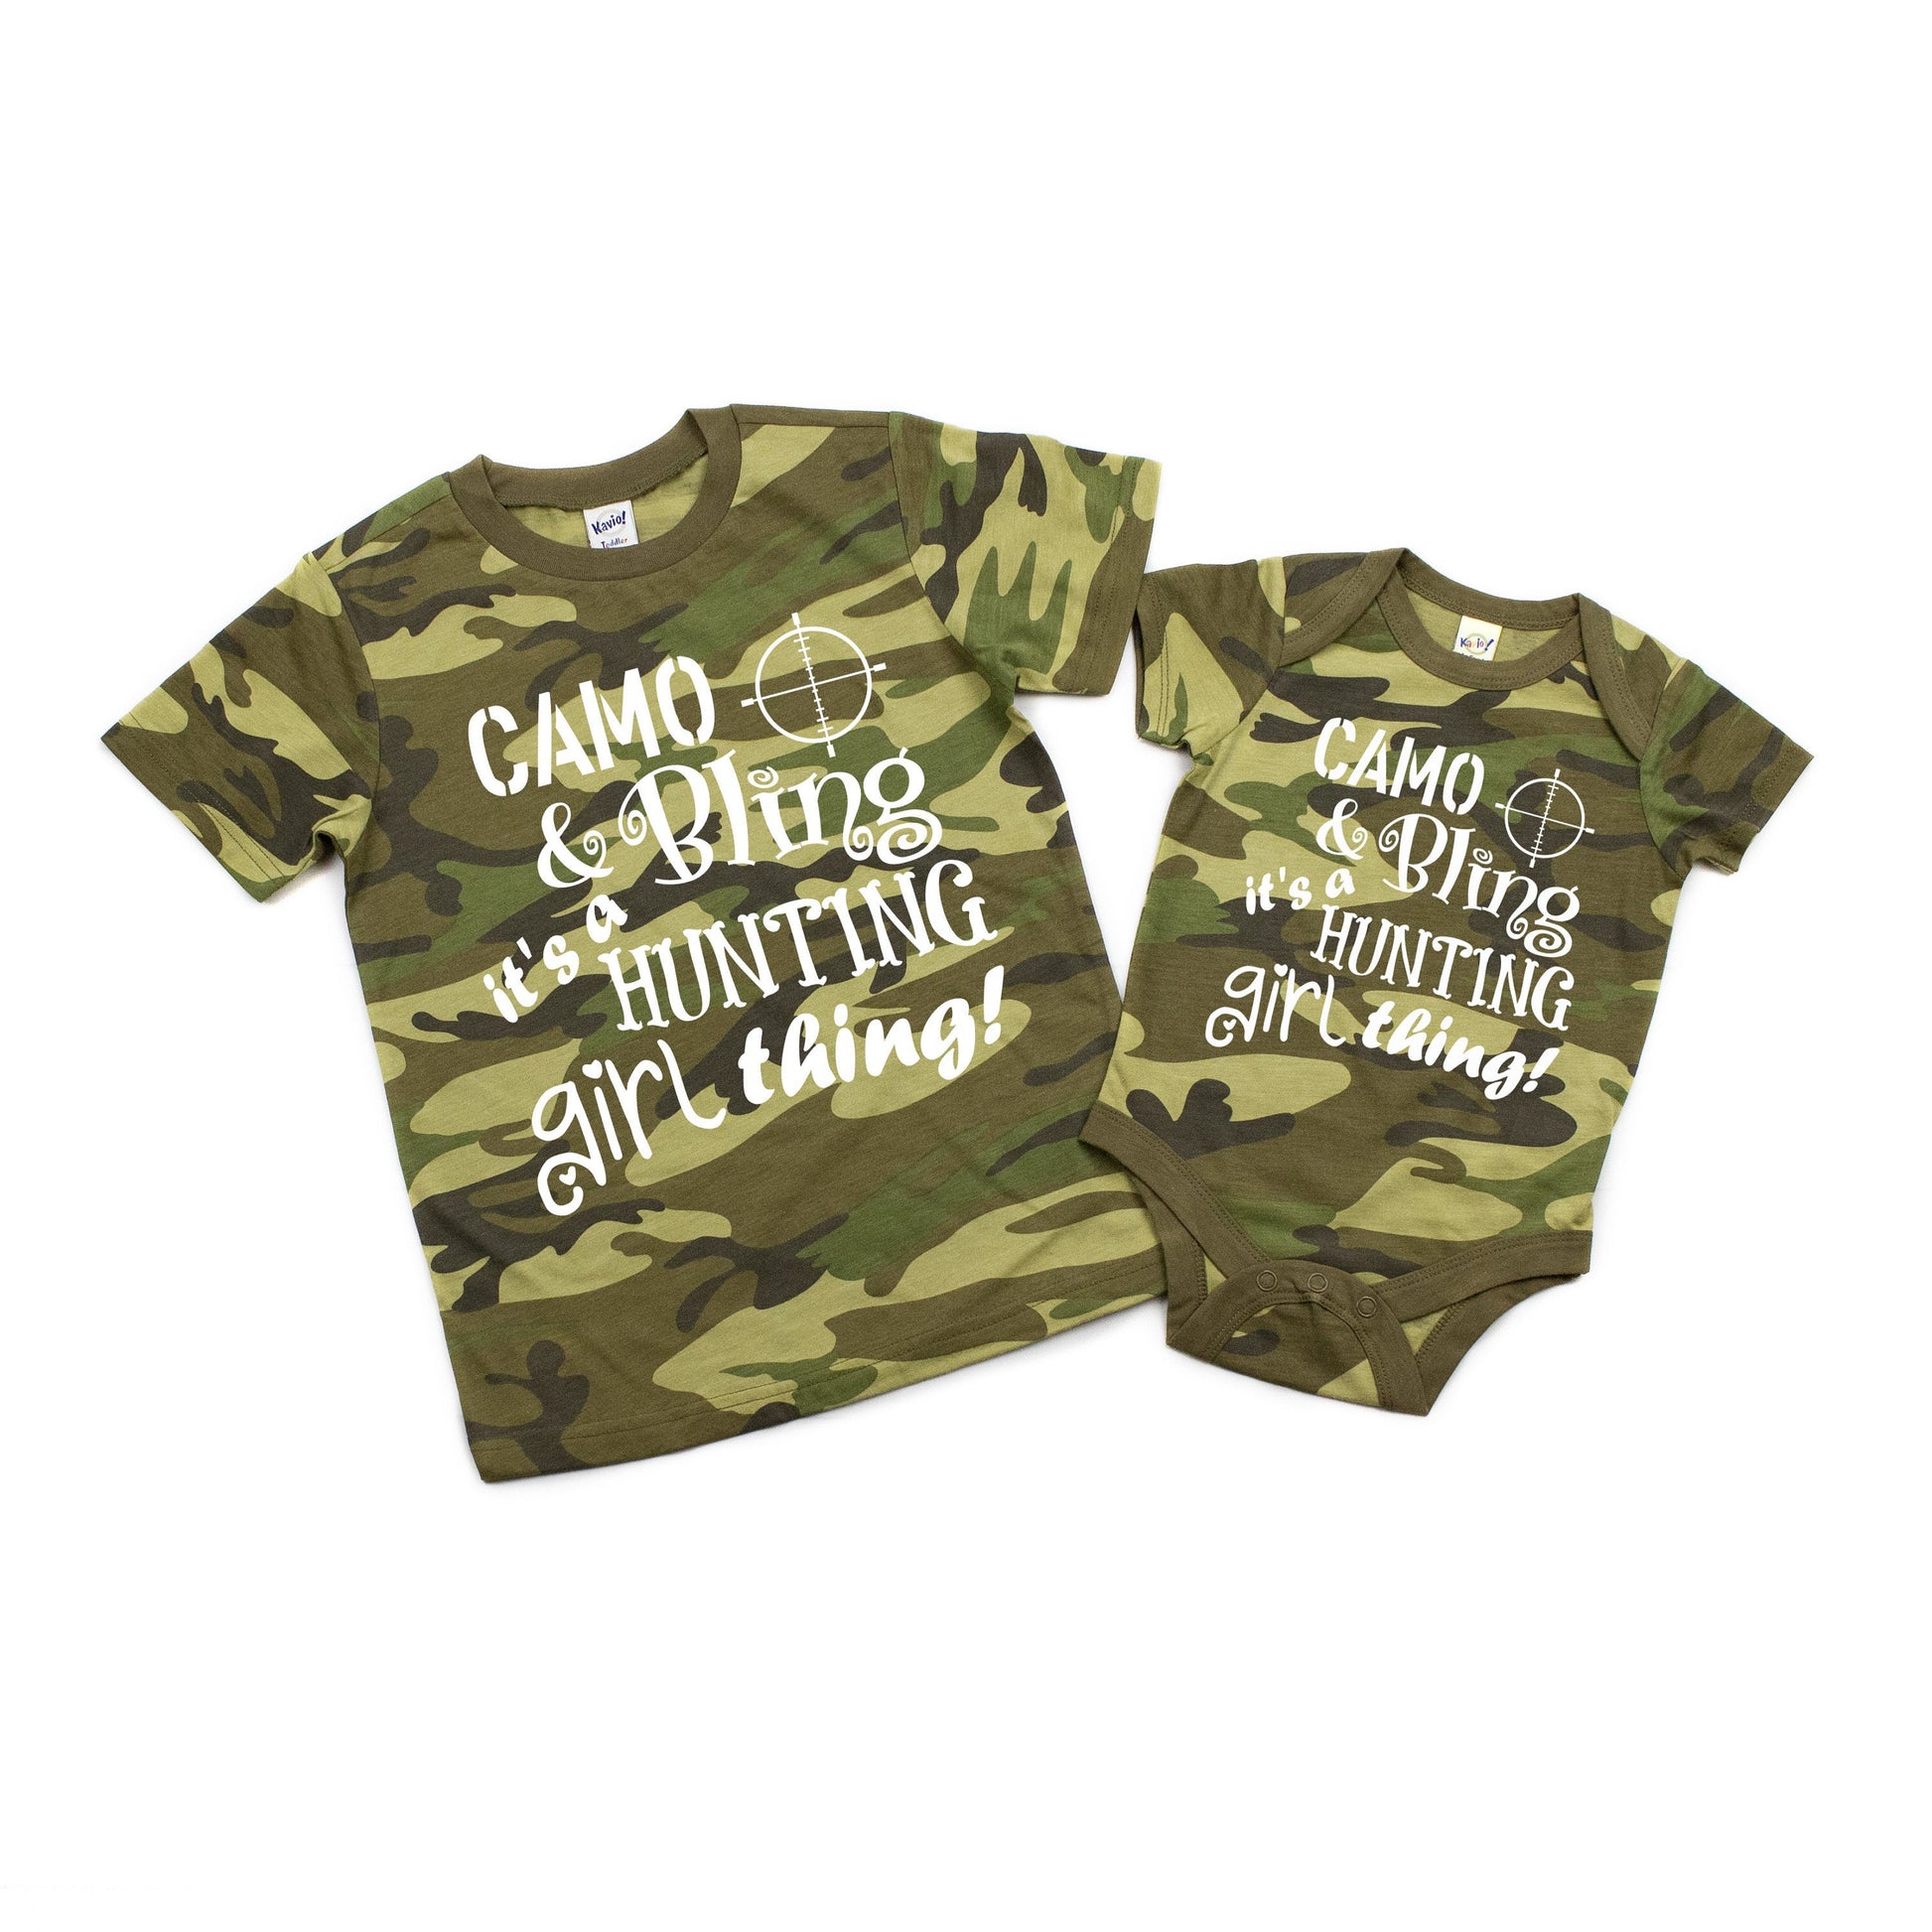 Camo and Bling Infant or Youth Shirt or Bodysuit - Toddler Girl Shirt - Hunting Shirts for Kids - 2nd Amendment Shirt for Kids